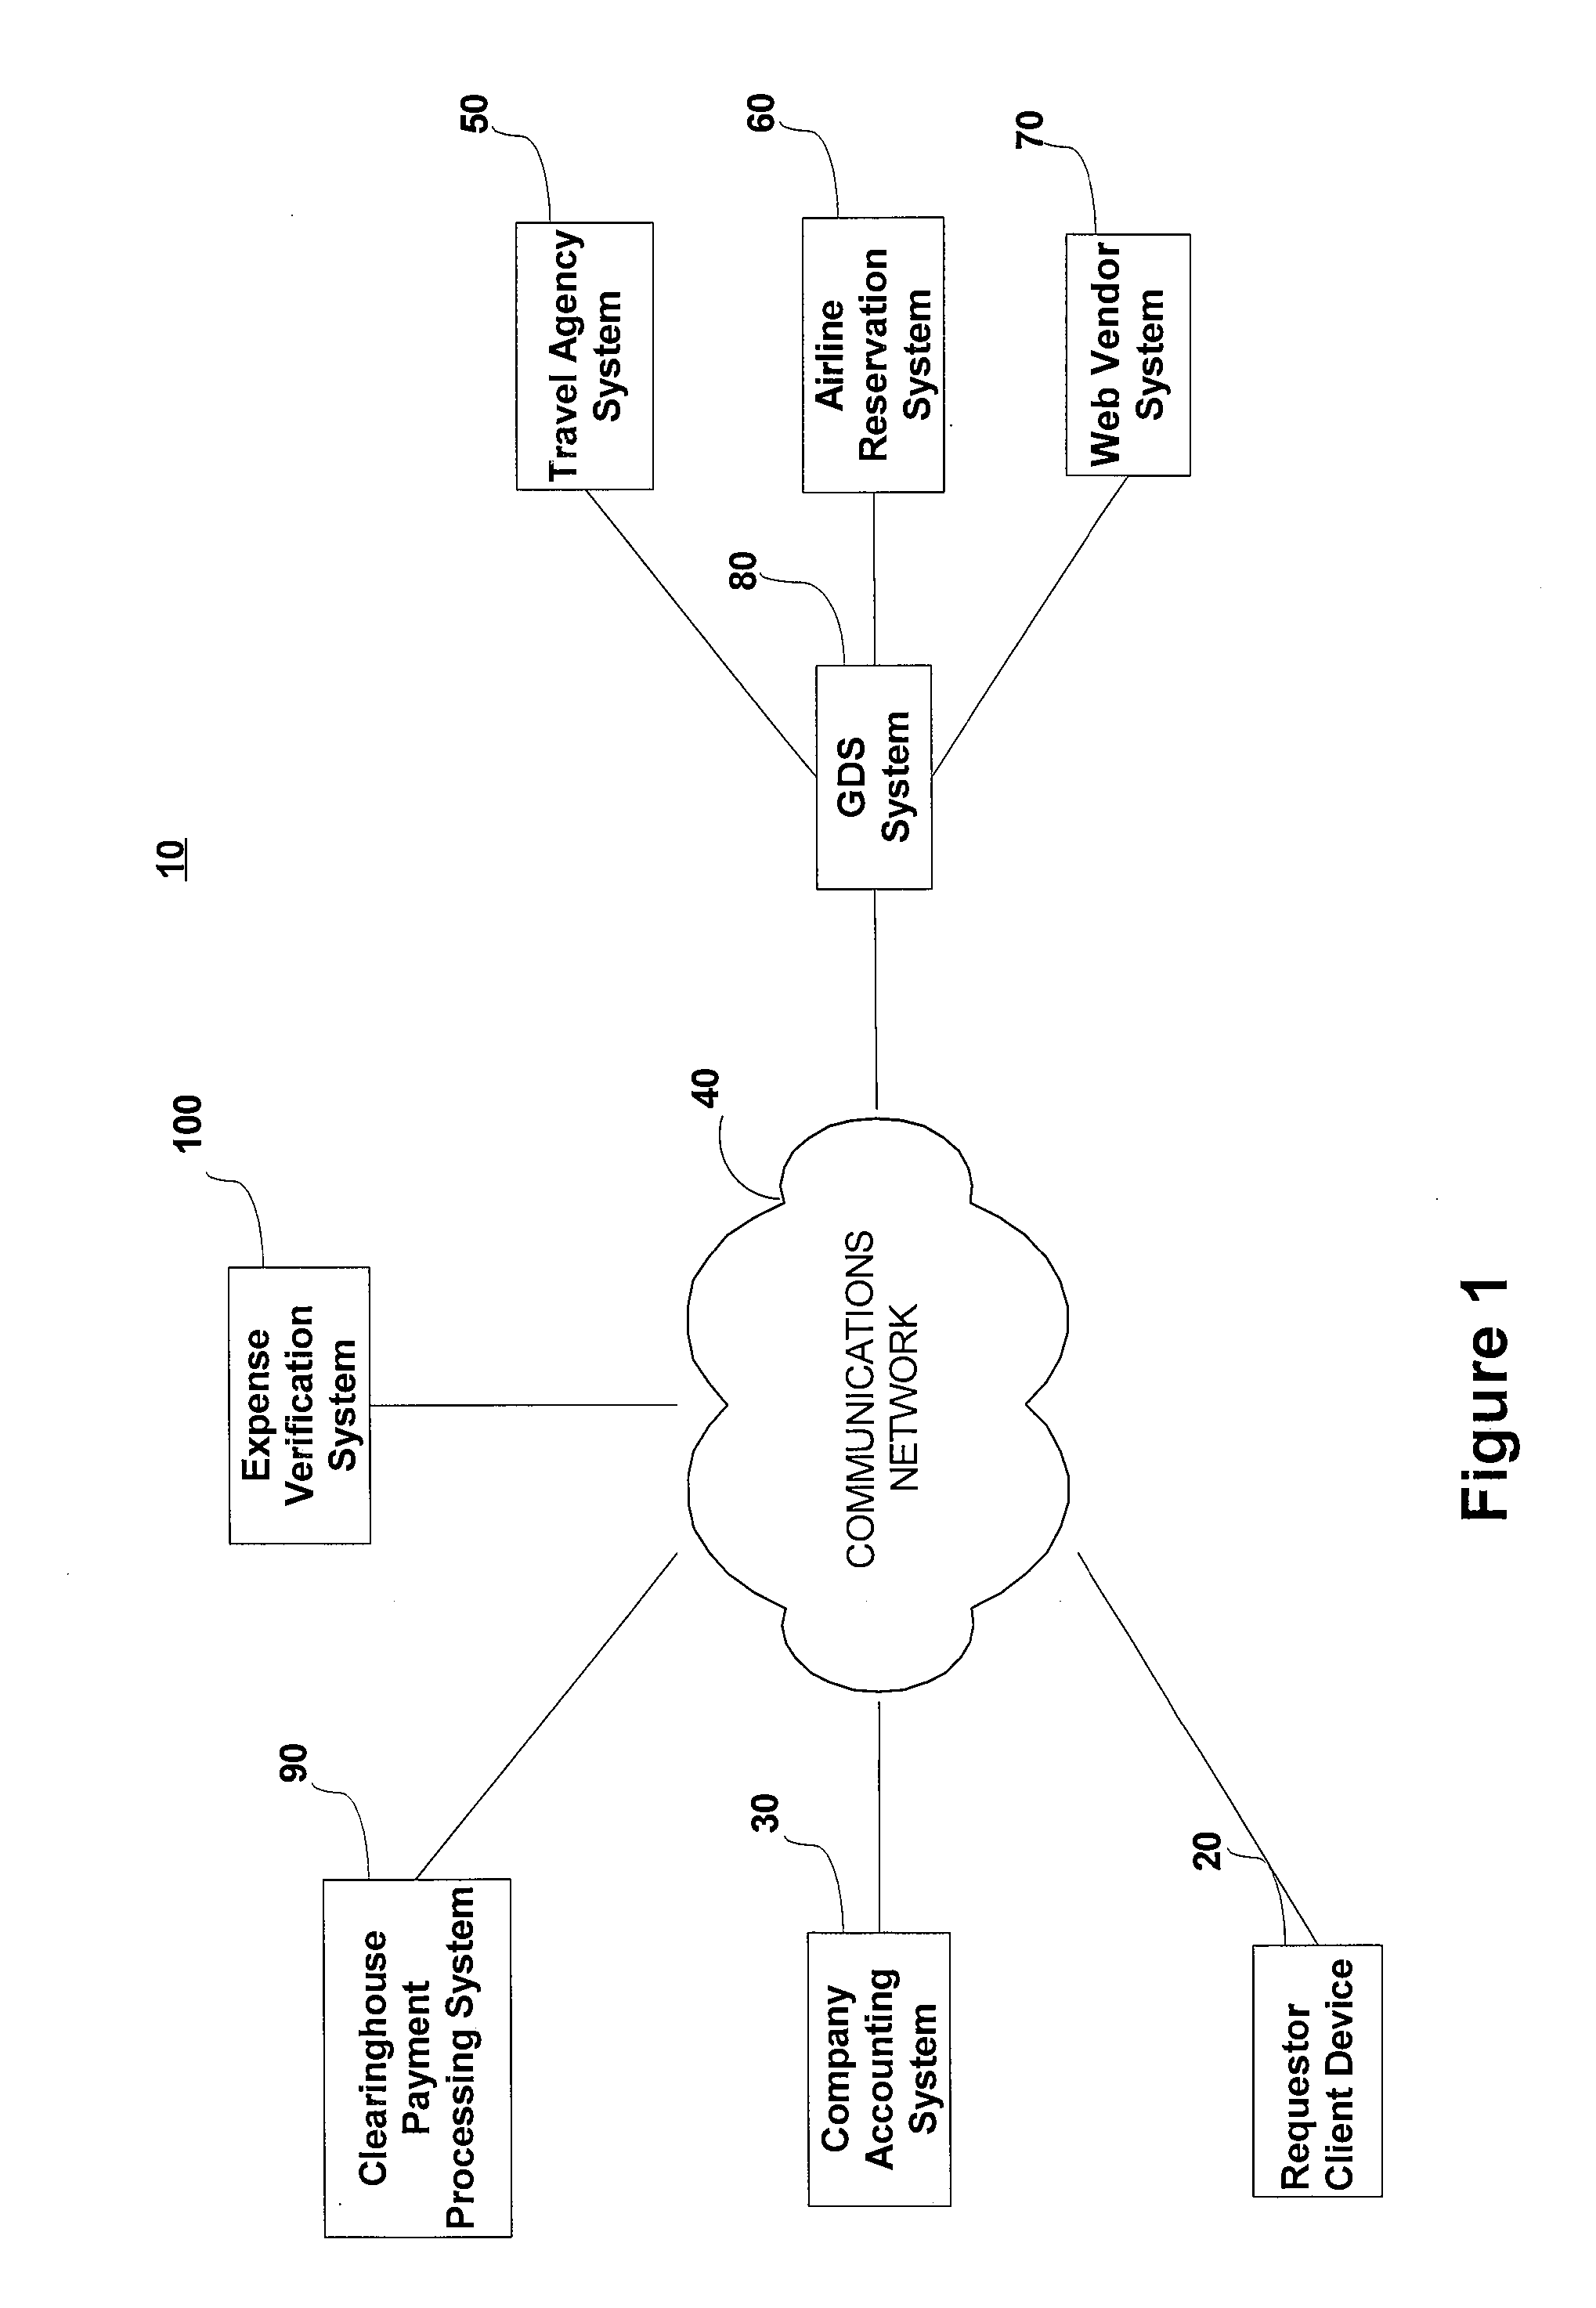 System and method for ensuring accurate reimbursement for travel expenses